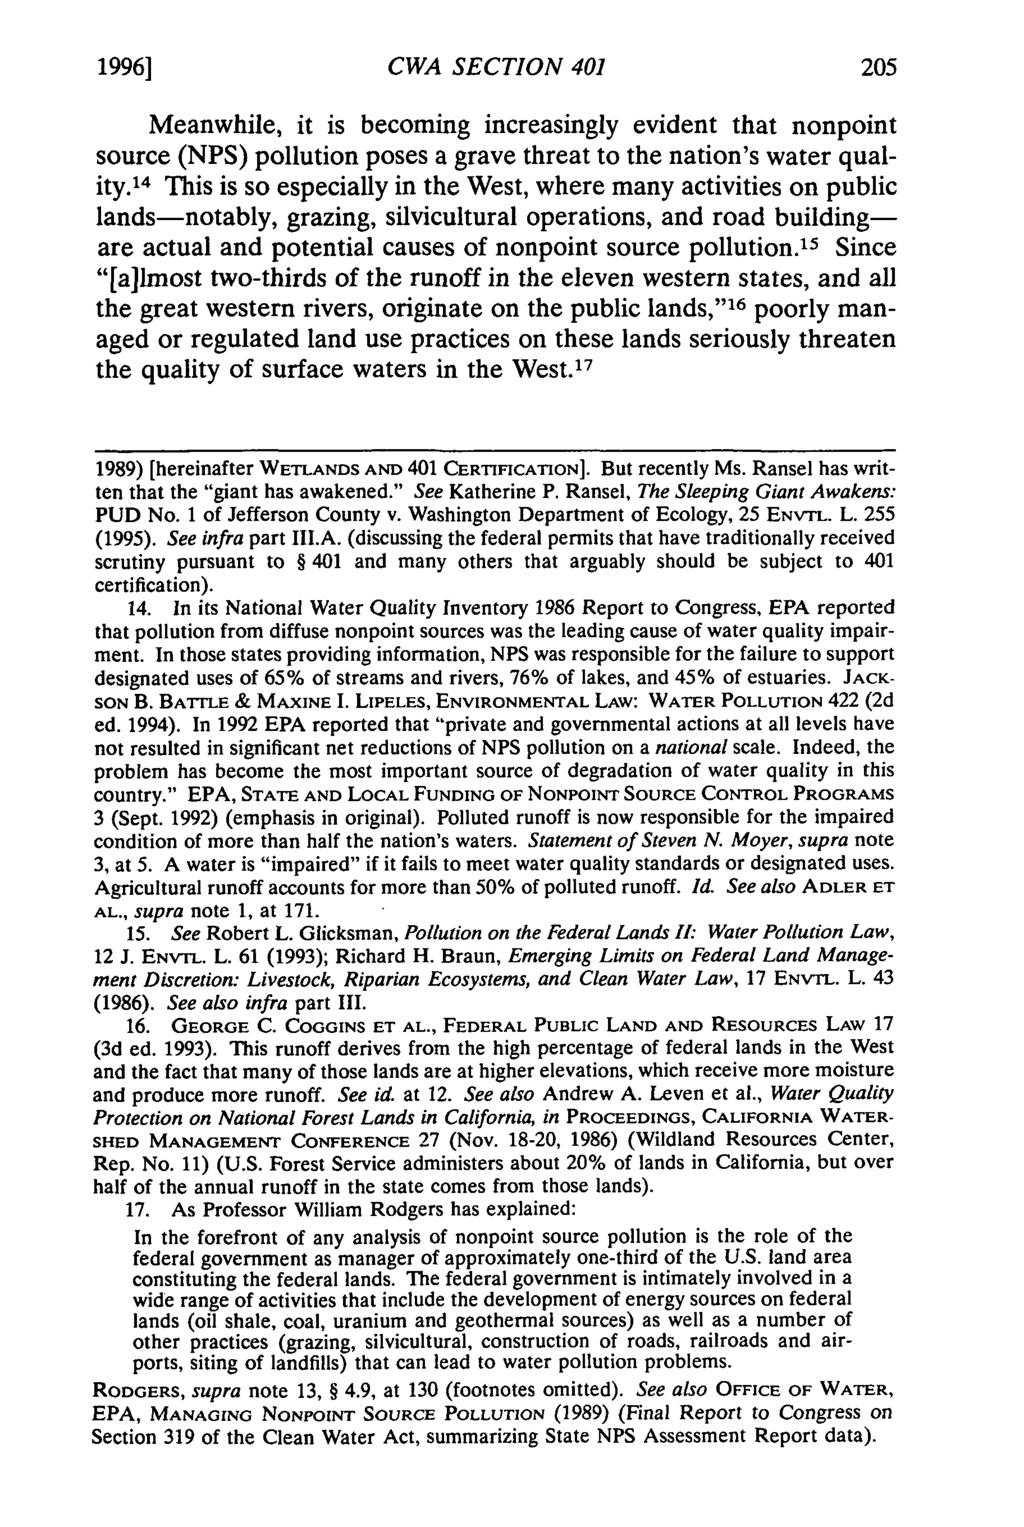 1996] CWA SECTION 401 Meanwhile, it is becoming increasingly evident that nonpoint source (NPS) pollution poses a grave threat to the nation's water quality.